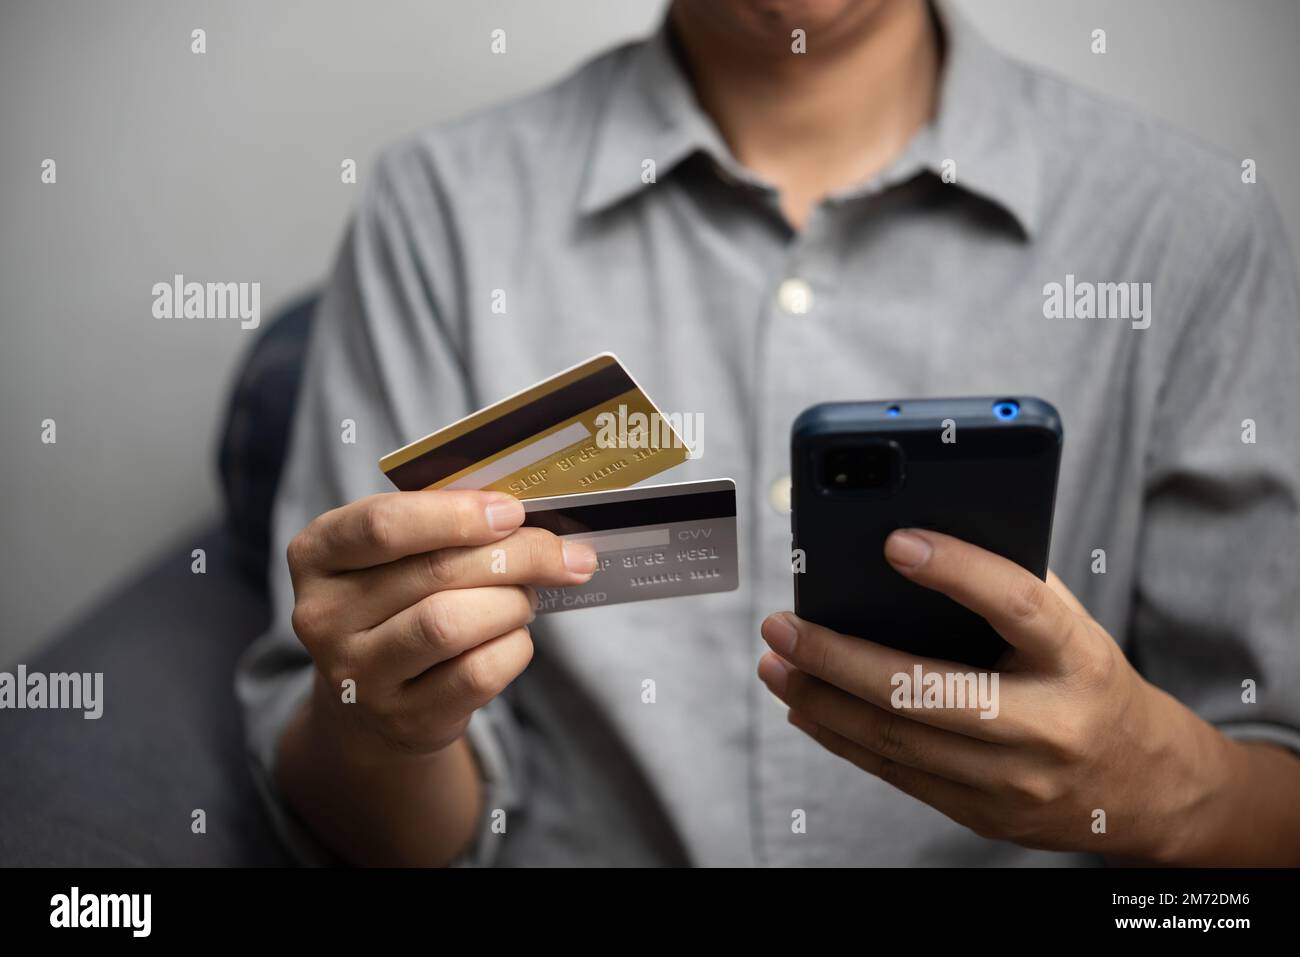 Man using smartphone for online banking or shopping and payment via credit card. man paying and shopping with mobile phone application e commerce wall Stock Photo